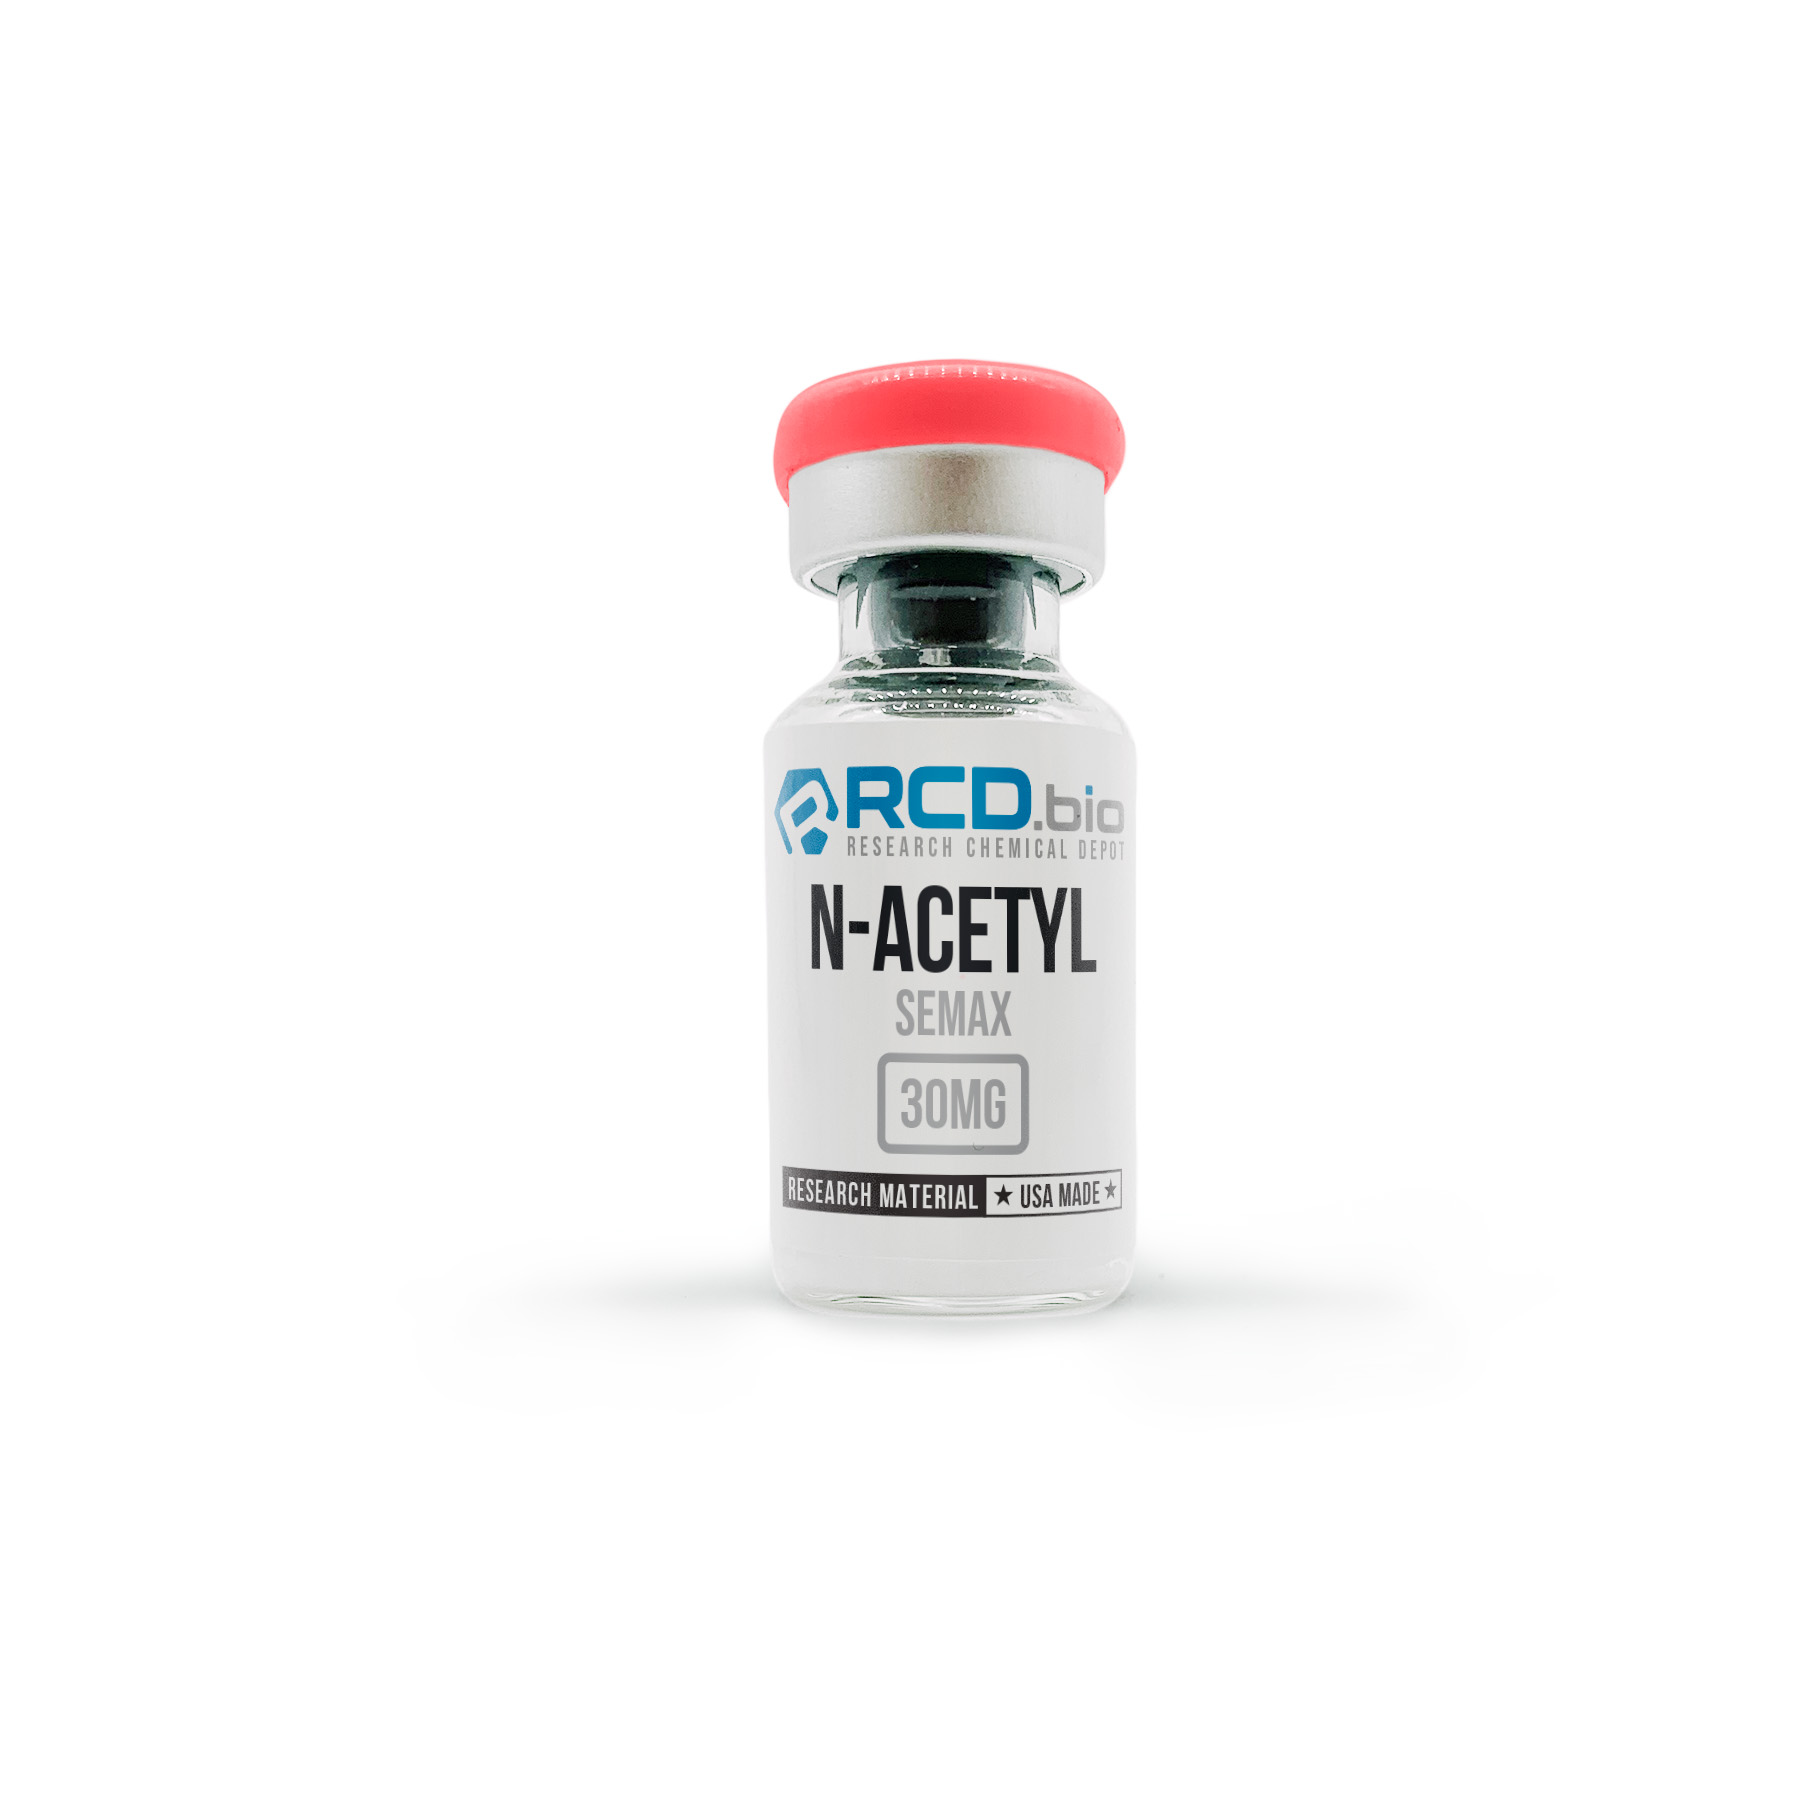 Buy N-Acetyl Semax For Sale | Fast Shipping | RCD.bio